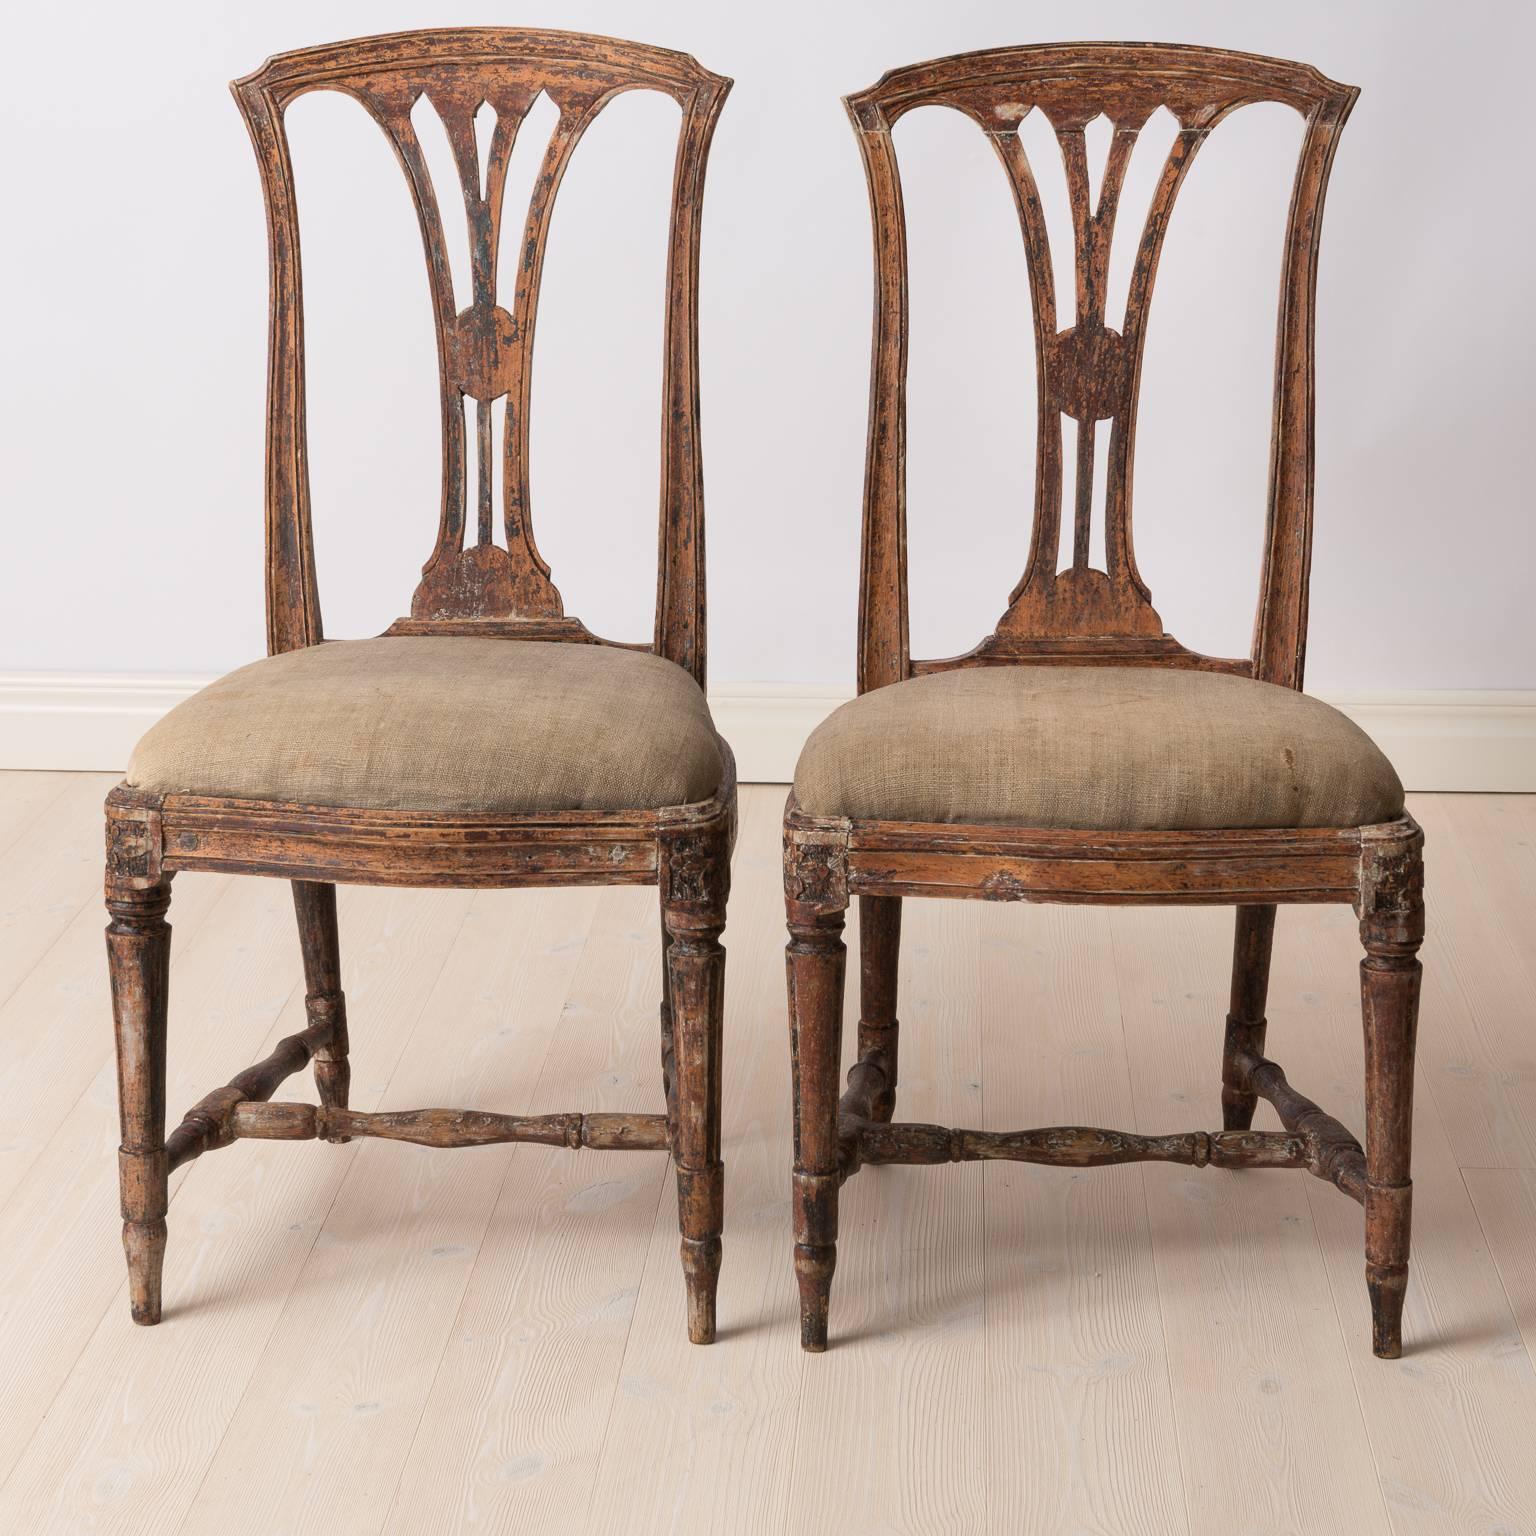 1700s chairs